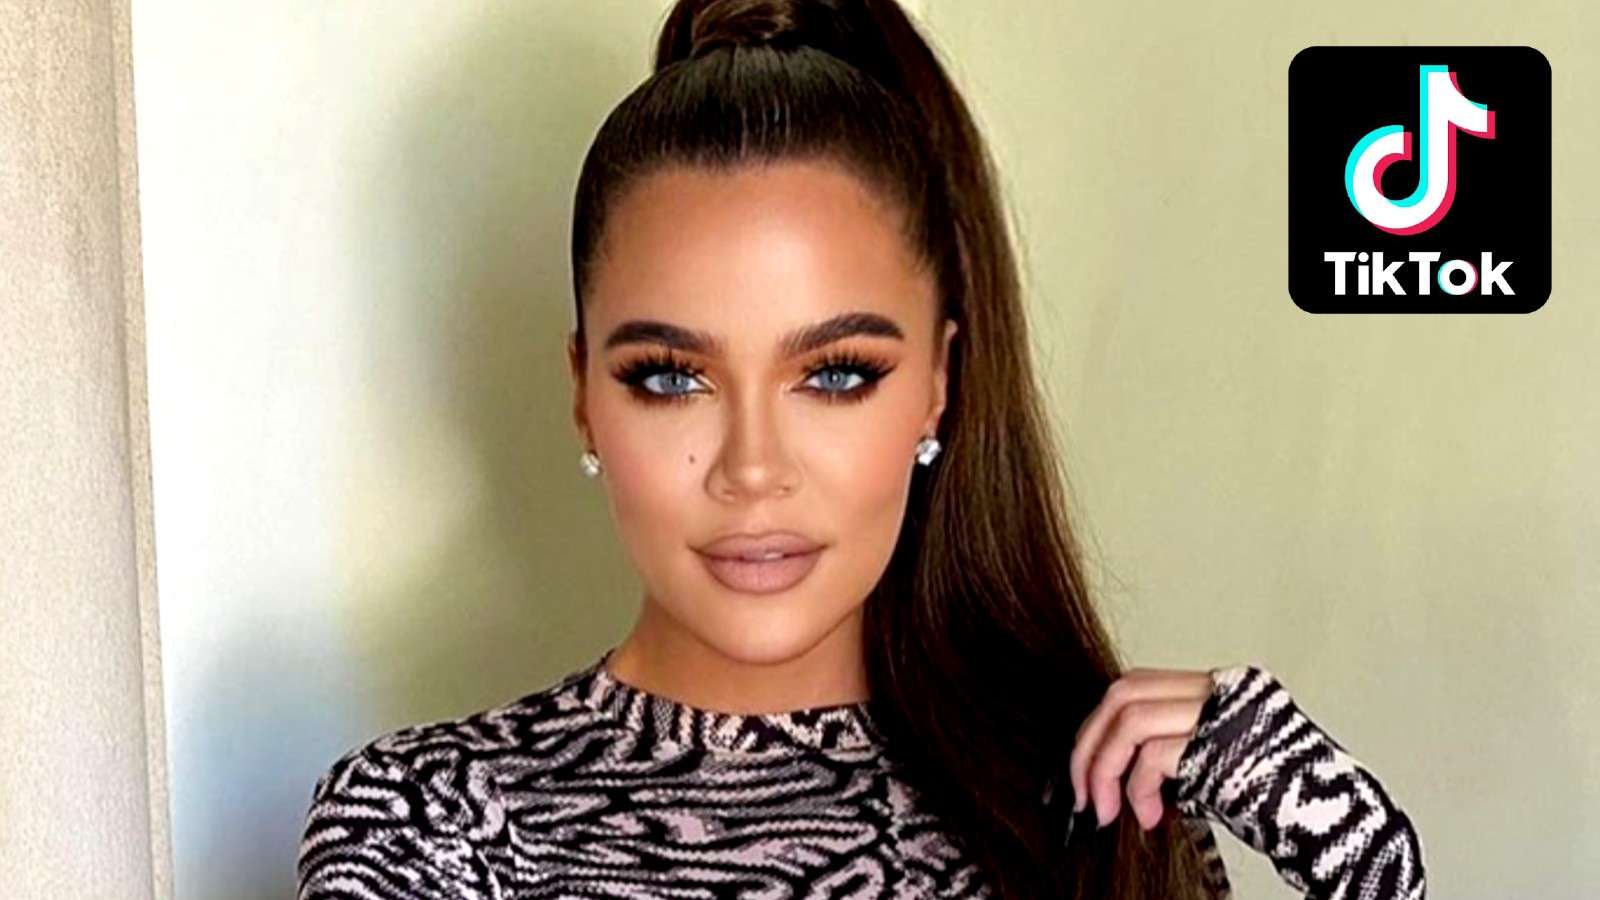 Khloe Kardashian poses in an Instagram picture